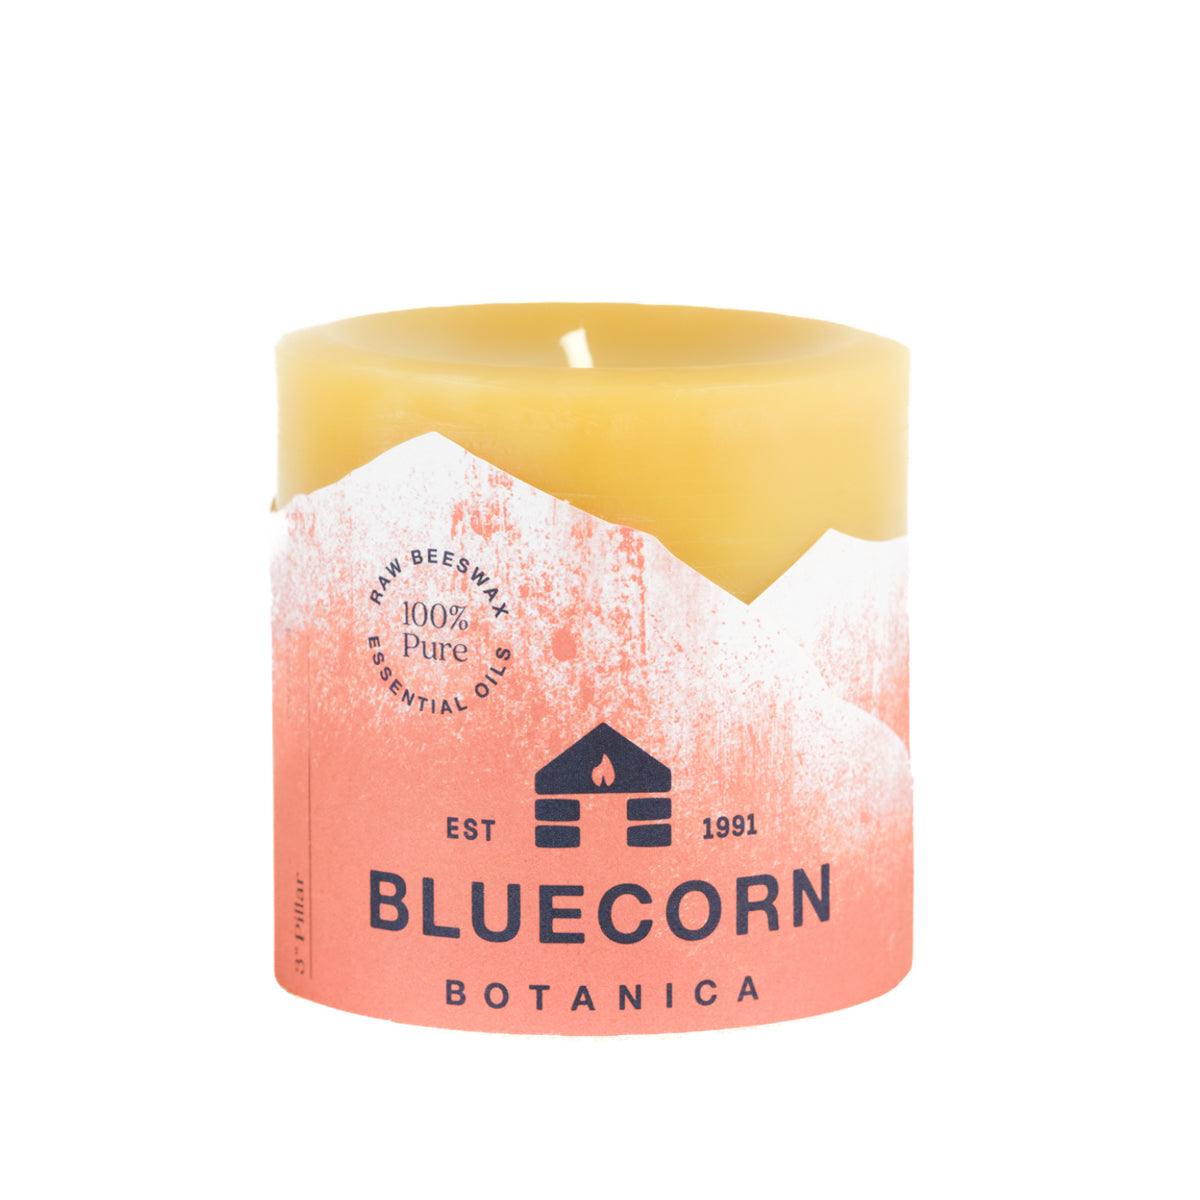 Bluecorn Botanica 100% Pure Beeswax Tangerine and Geranium 3" x 3" Scented Pillar Candle. Burn Time: 50 hours. Made with 100% Pure Beeswax, 100% Pure Essential Oils, and a 100% pure cotton wick, no lead. Candles are paraffin free, clean burning and non-toxic. Features Bluecorn Botanica label in Orange printed on 100% recycled paper. Wax is golden in color. 